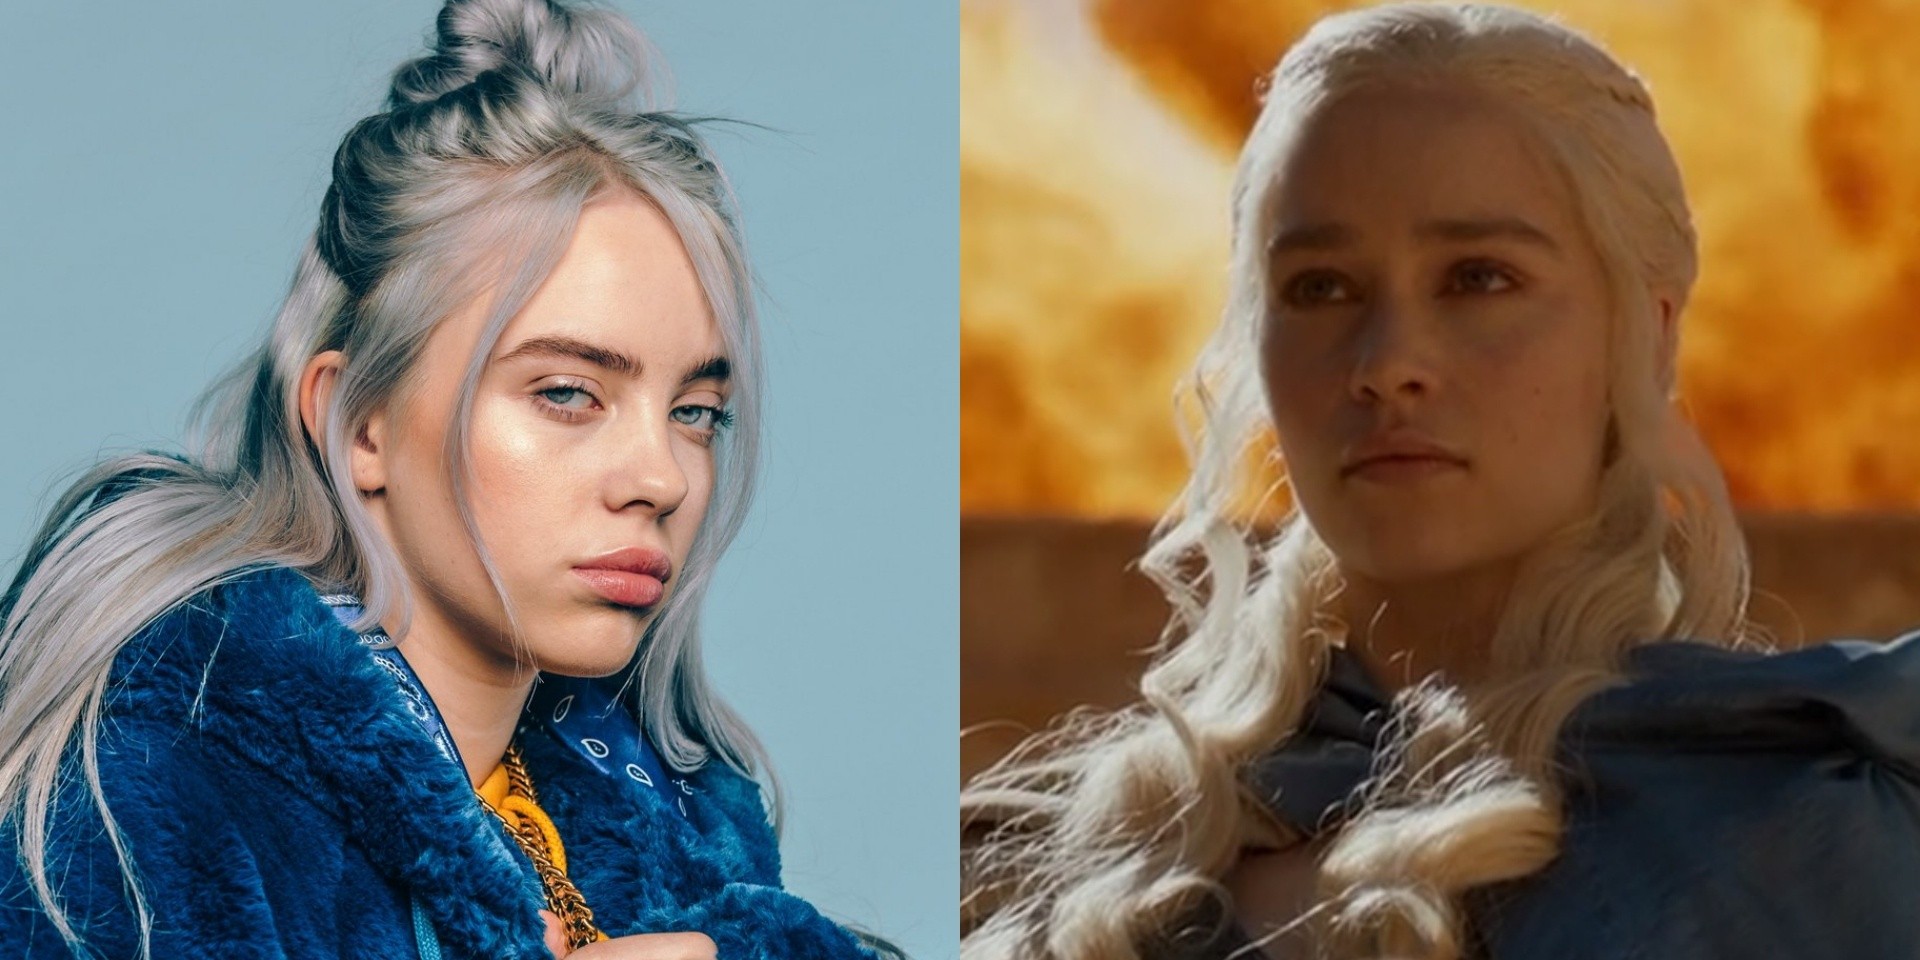 13 musicians reimagined as Game Of Thrones characters 